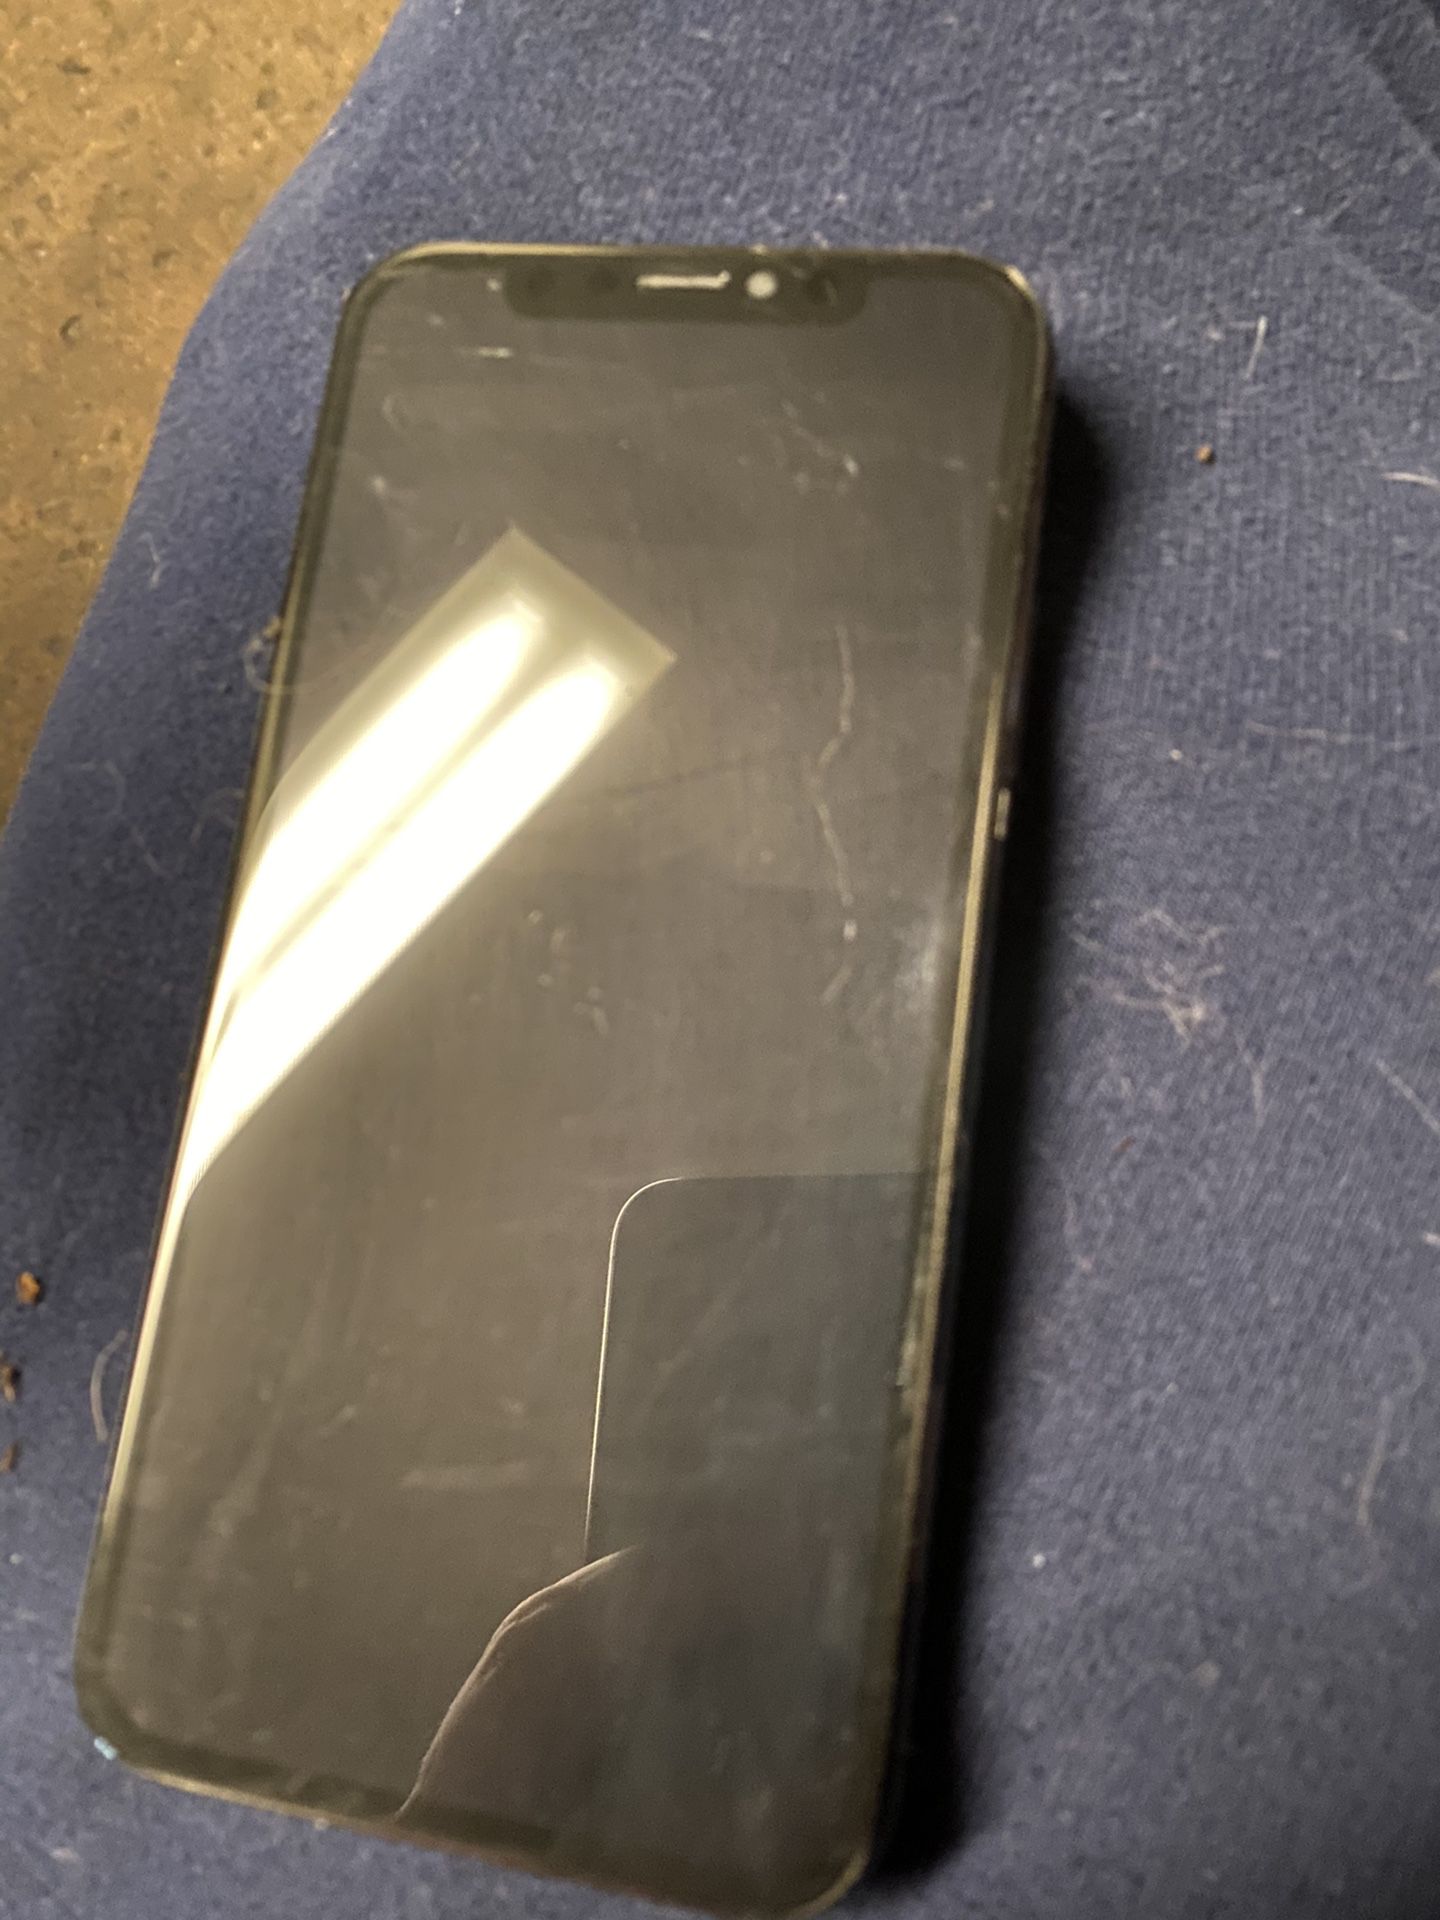 Broken iPhone X - Needs FaceID and a new screen